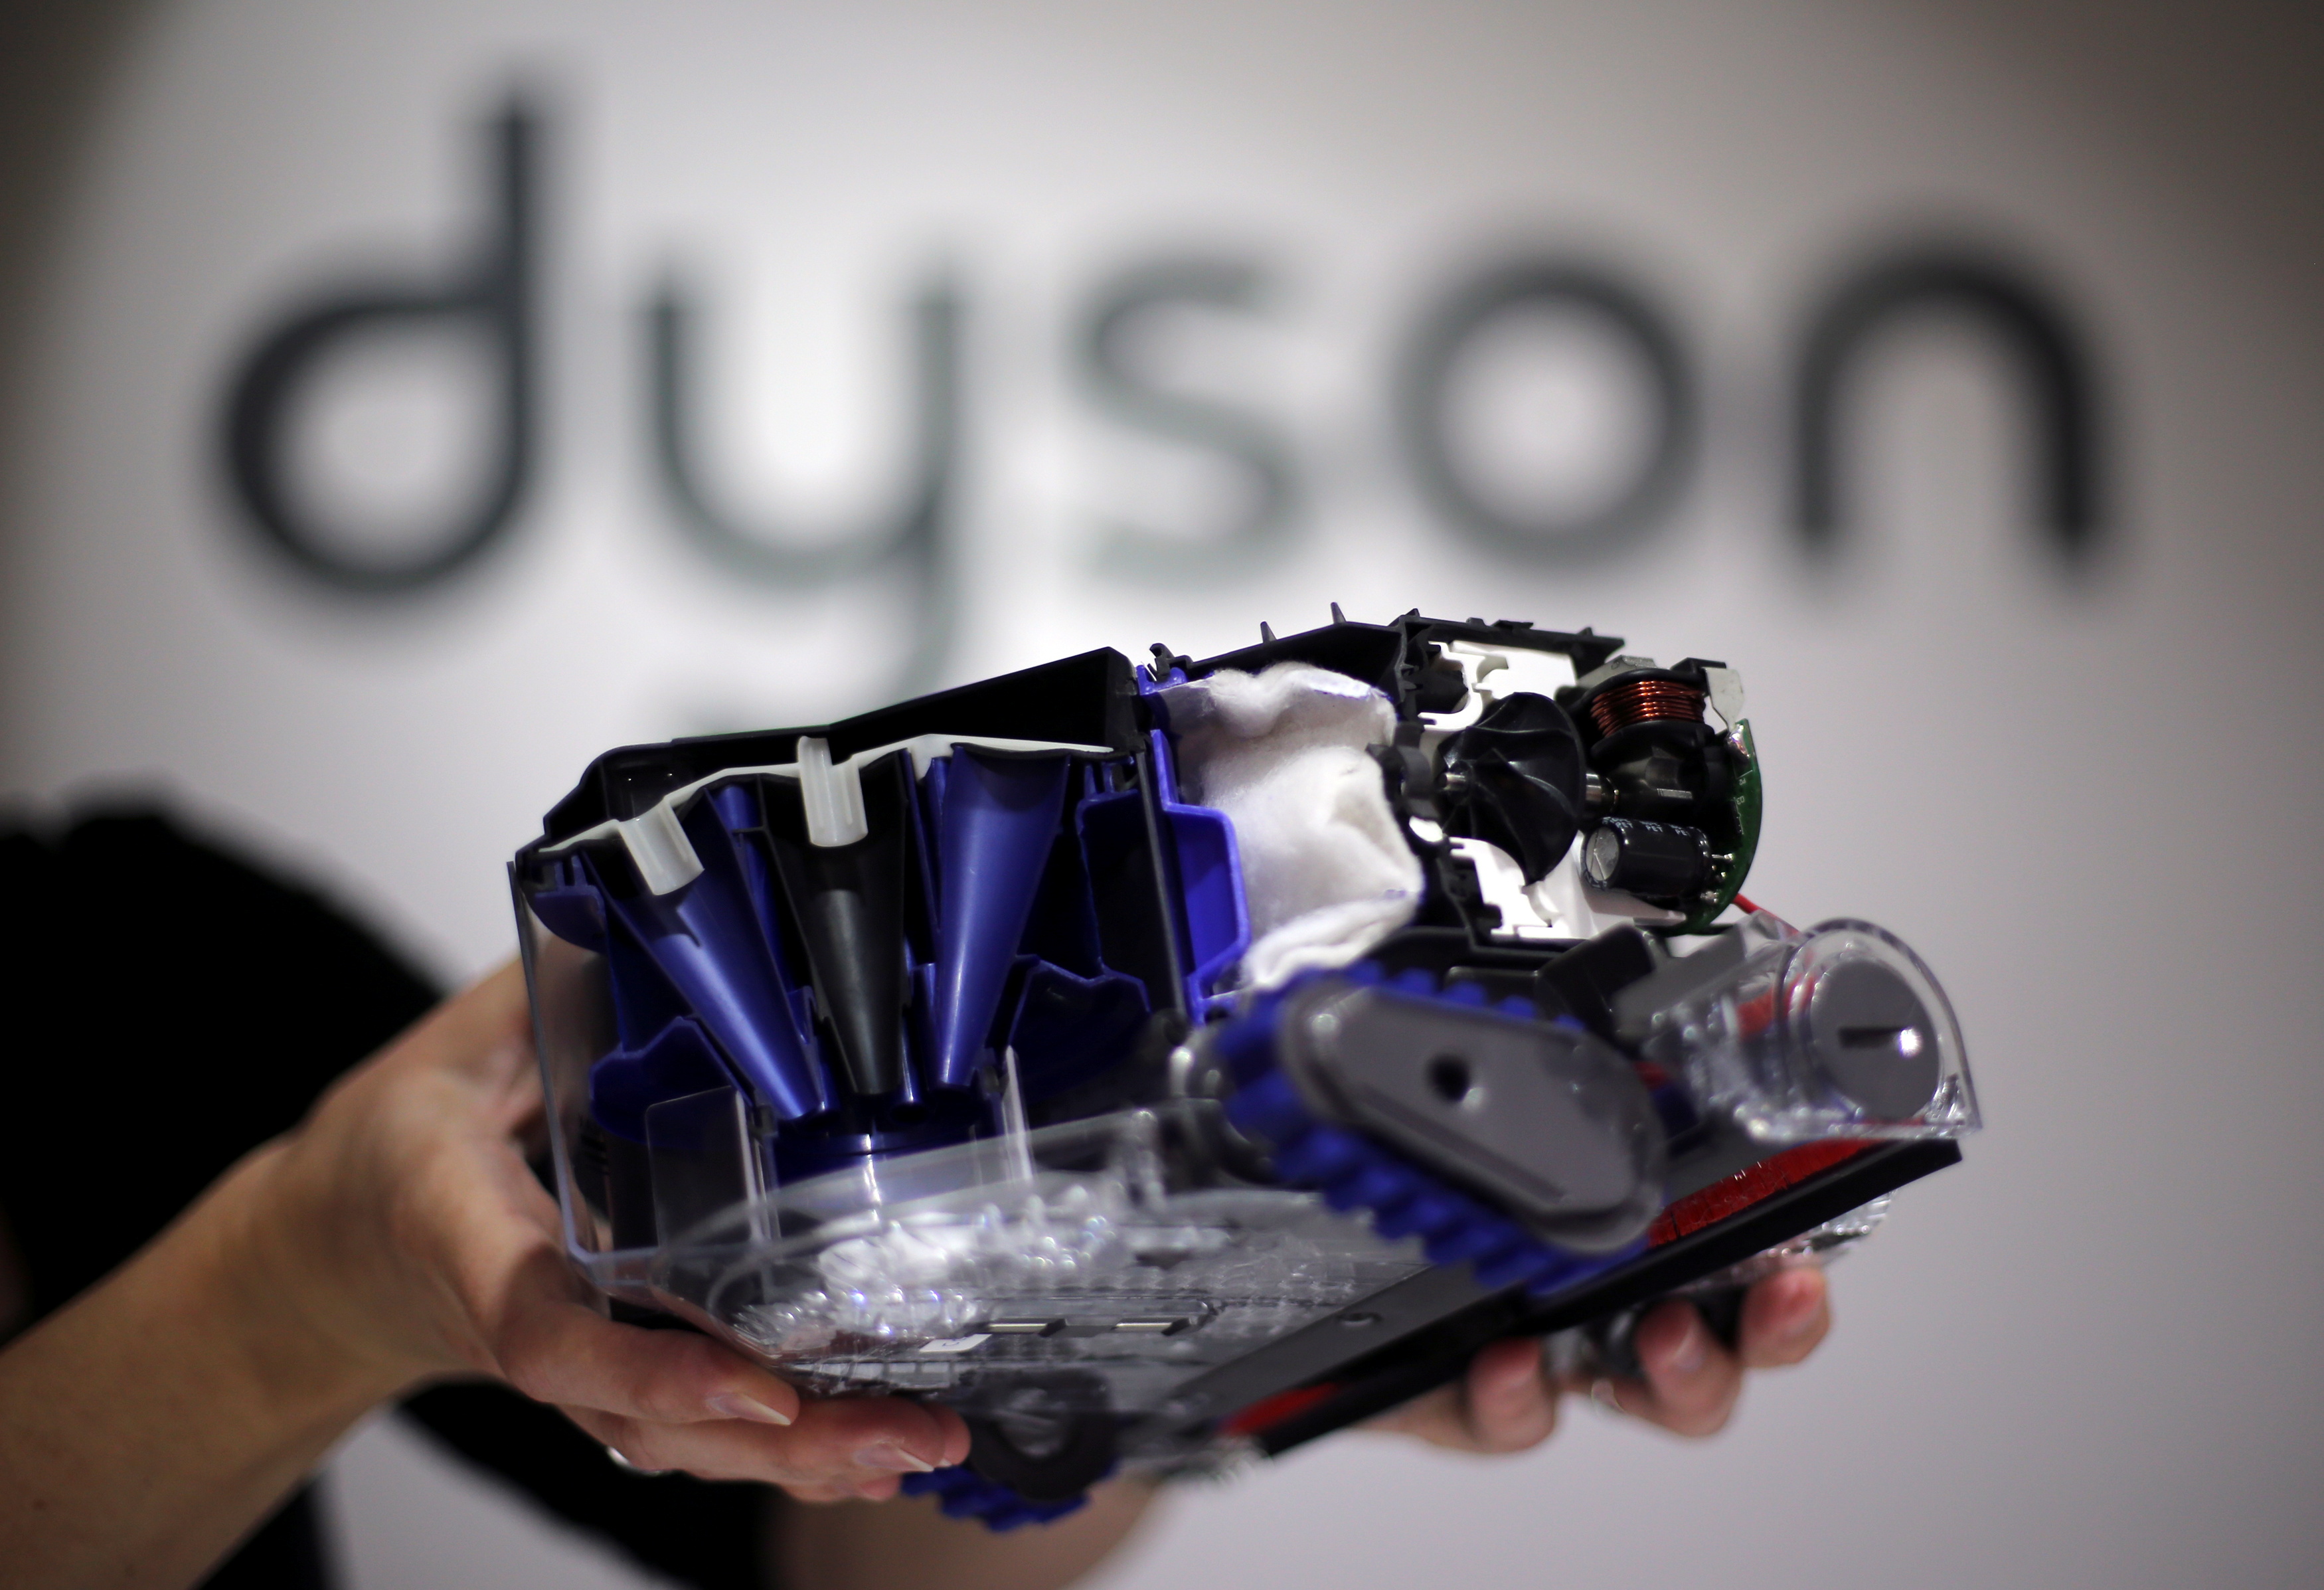 A Dyson employee shows a Dyson 360 Eye robot vacuum cleaner without its cover during the IFA Electronics show in Berlin September 4, 2014. REUTERS/Hannibal Hanschke/File Photo